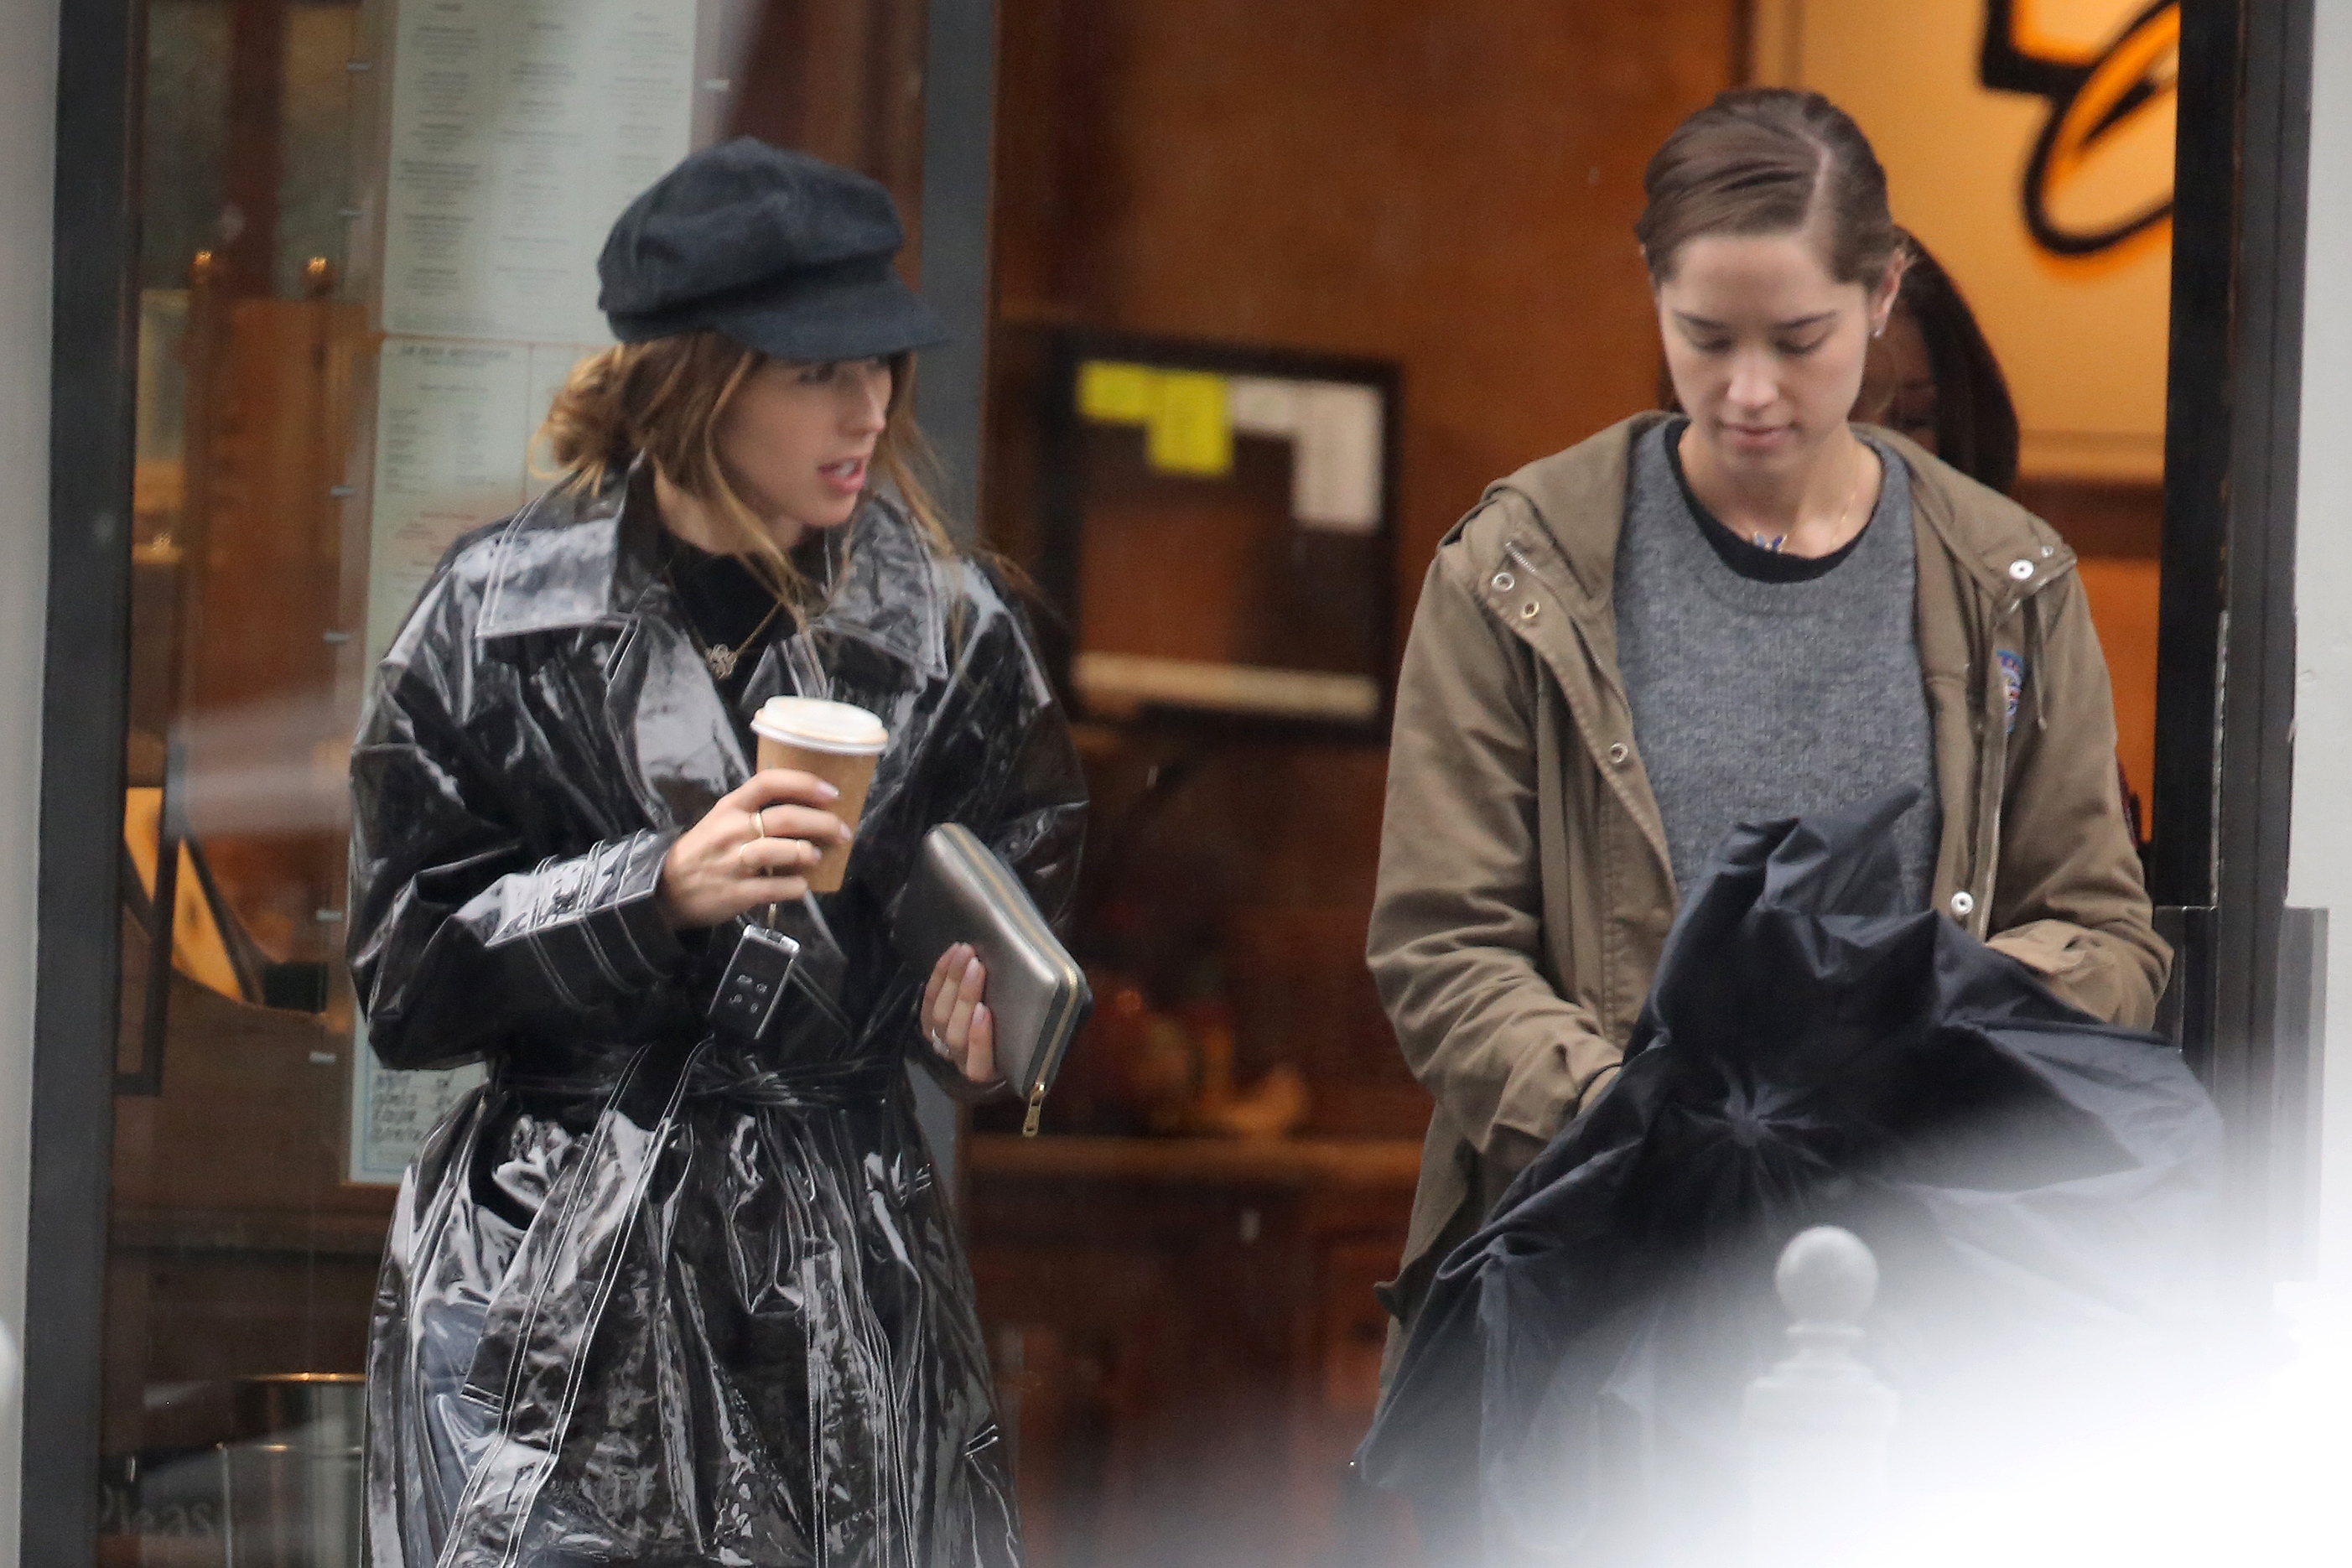 Katherine Schwarzenegger joins her sister Christina for a coffee